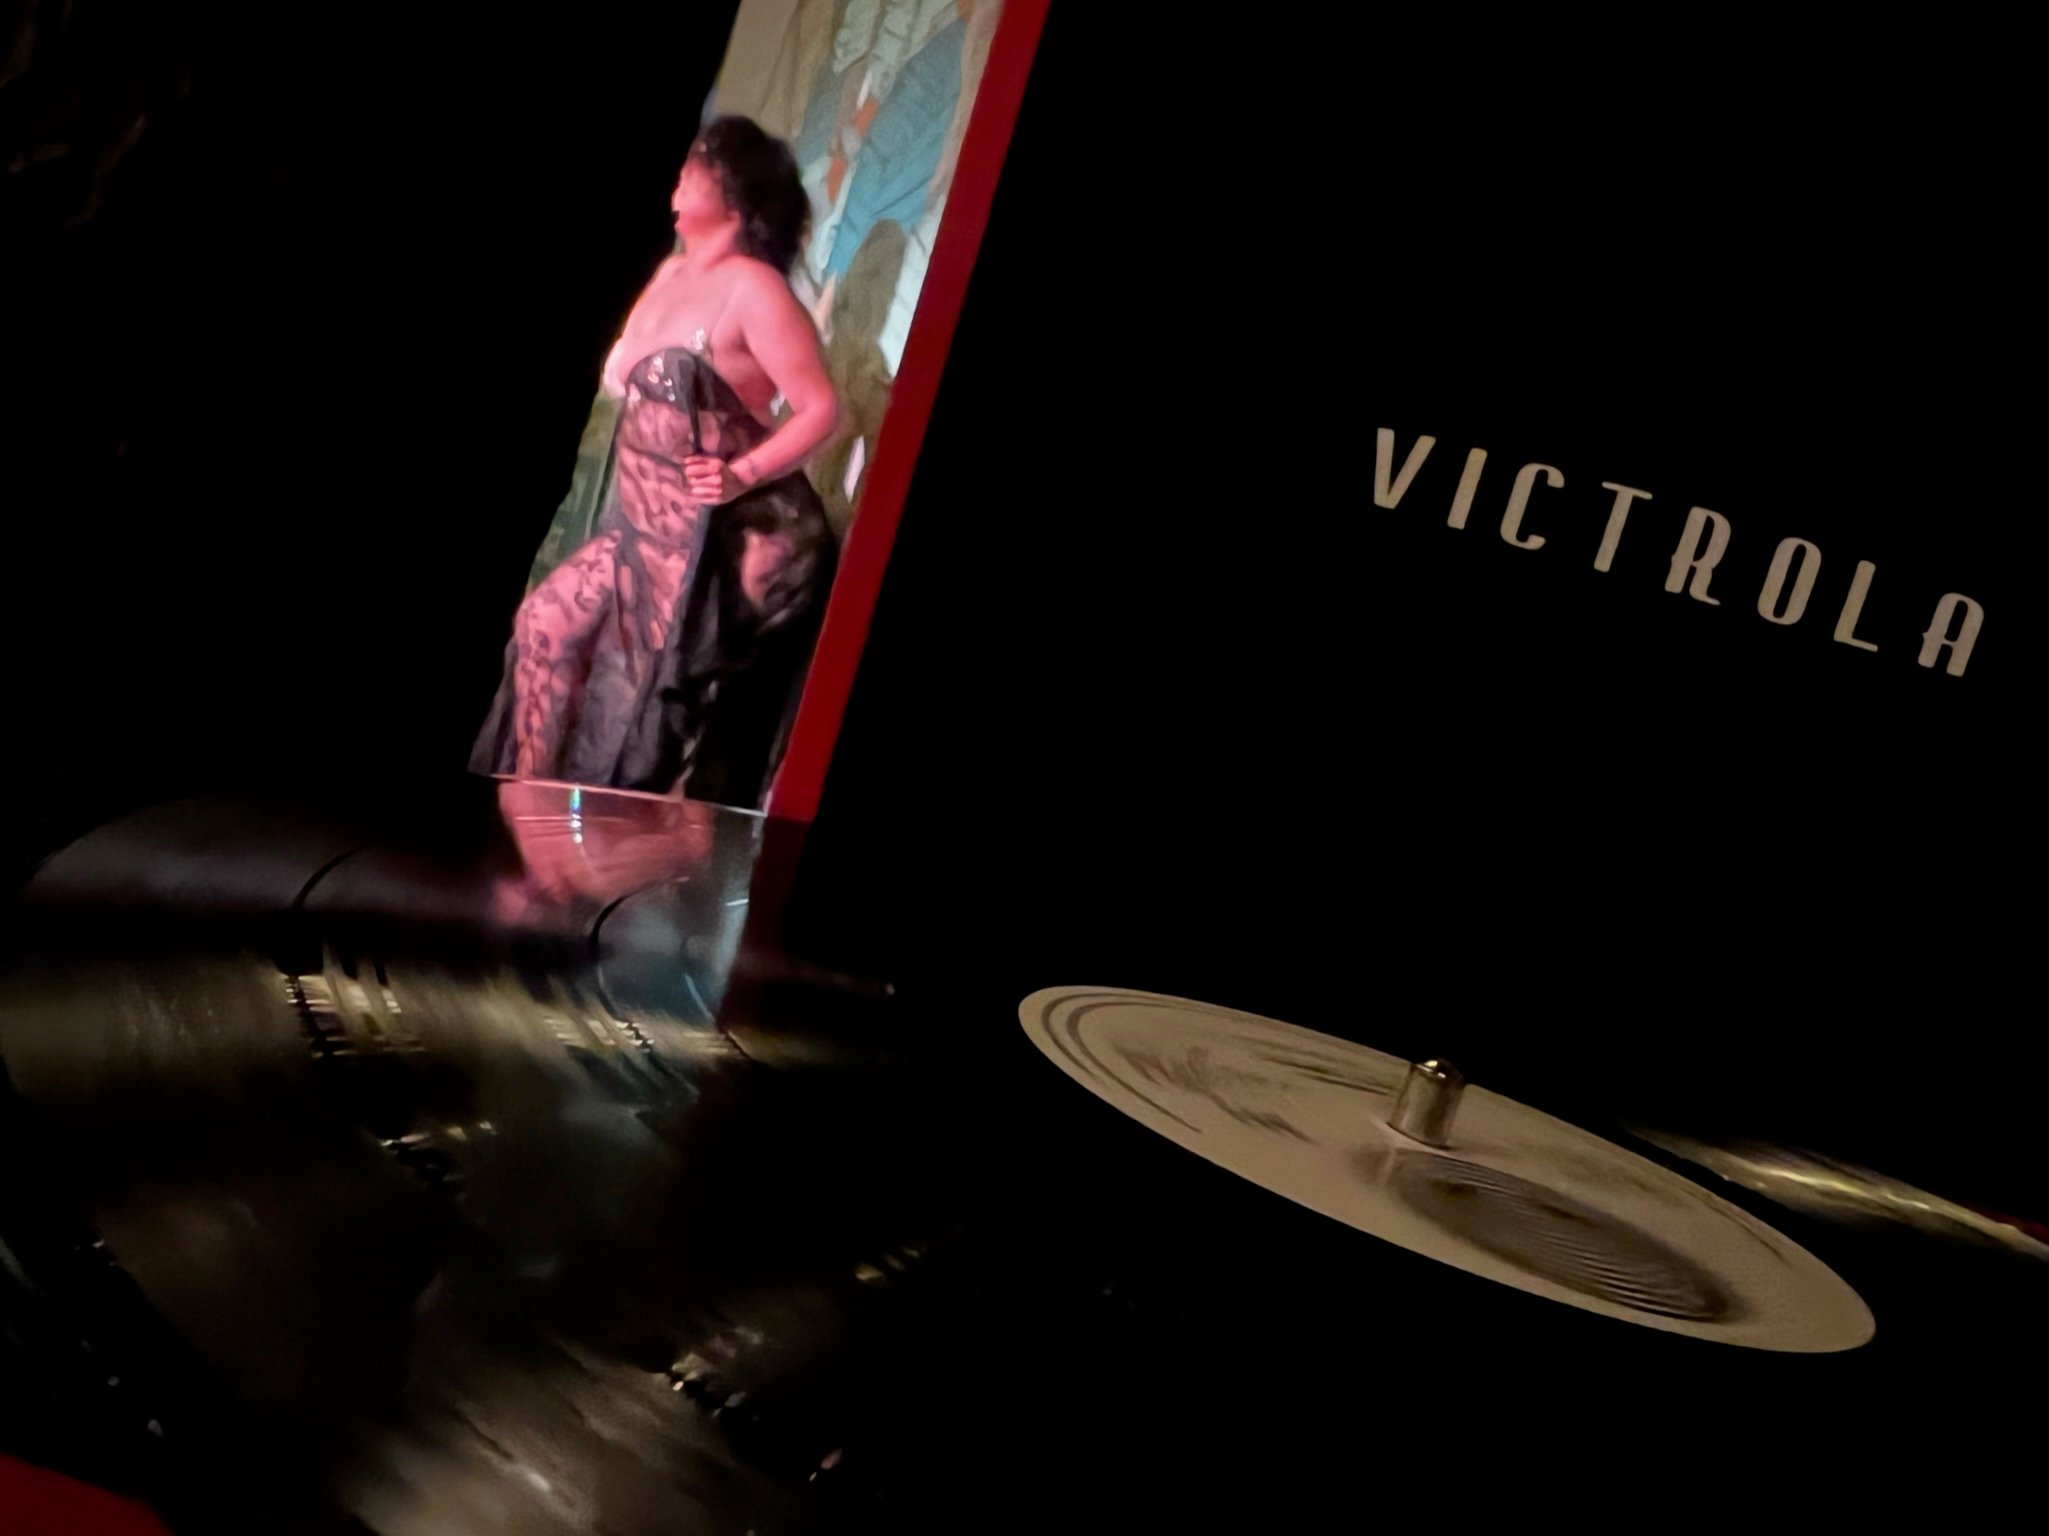 a burlesque dancer, blurred in the background, is refracted in the grooves of a vinyl